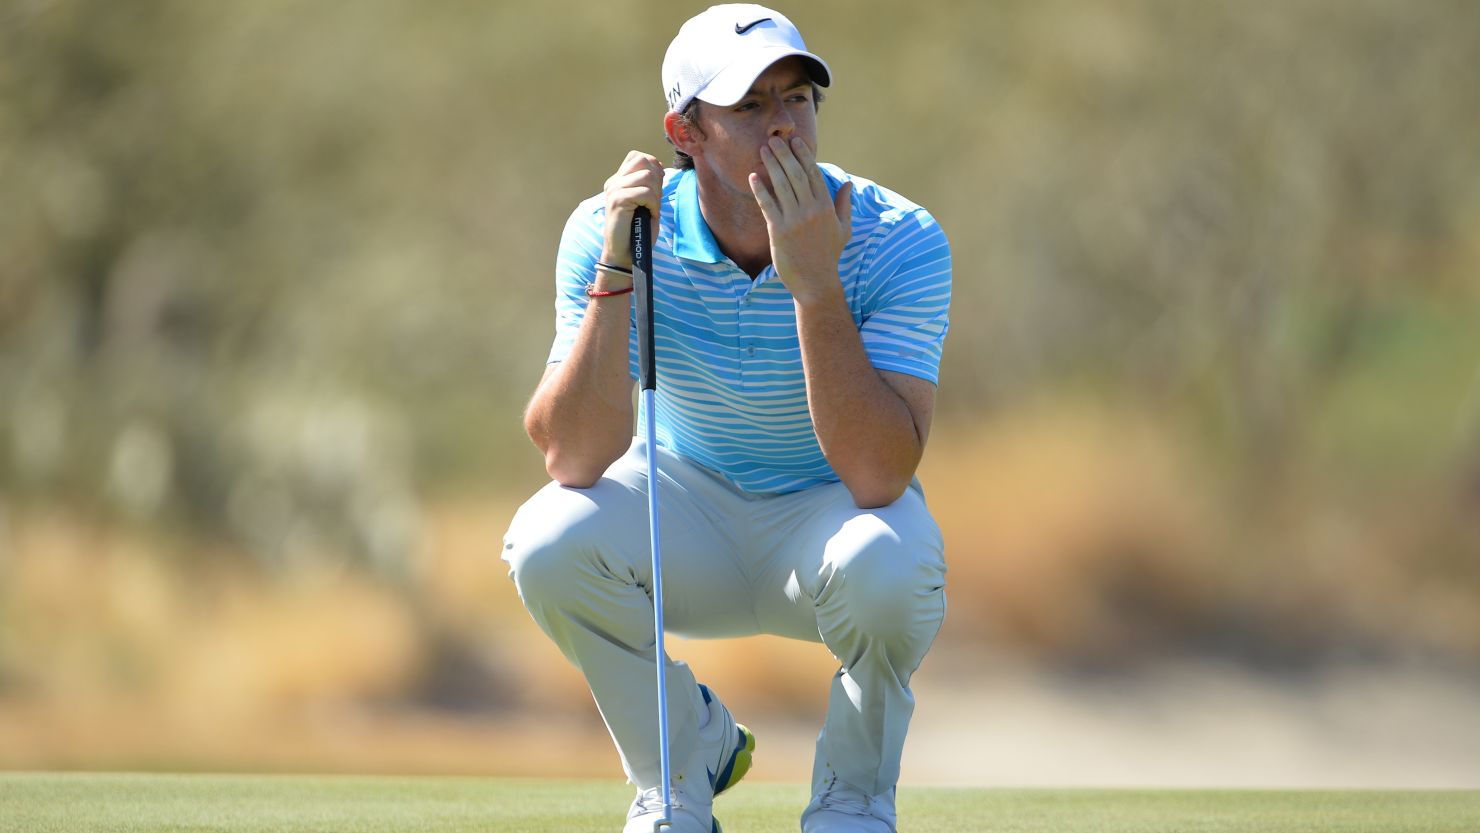 Rory McIlroy was eliminated from the World Match Play tournament in Arizona by Harris English.